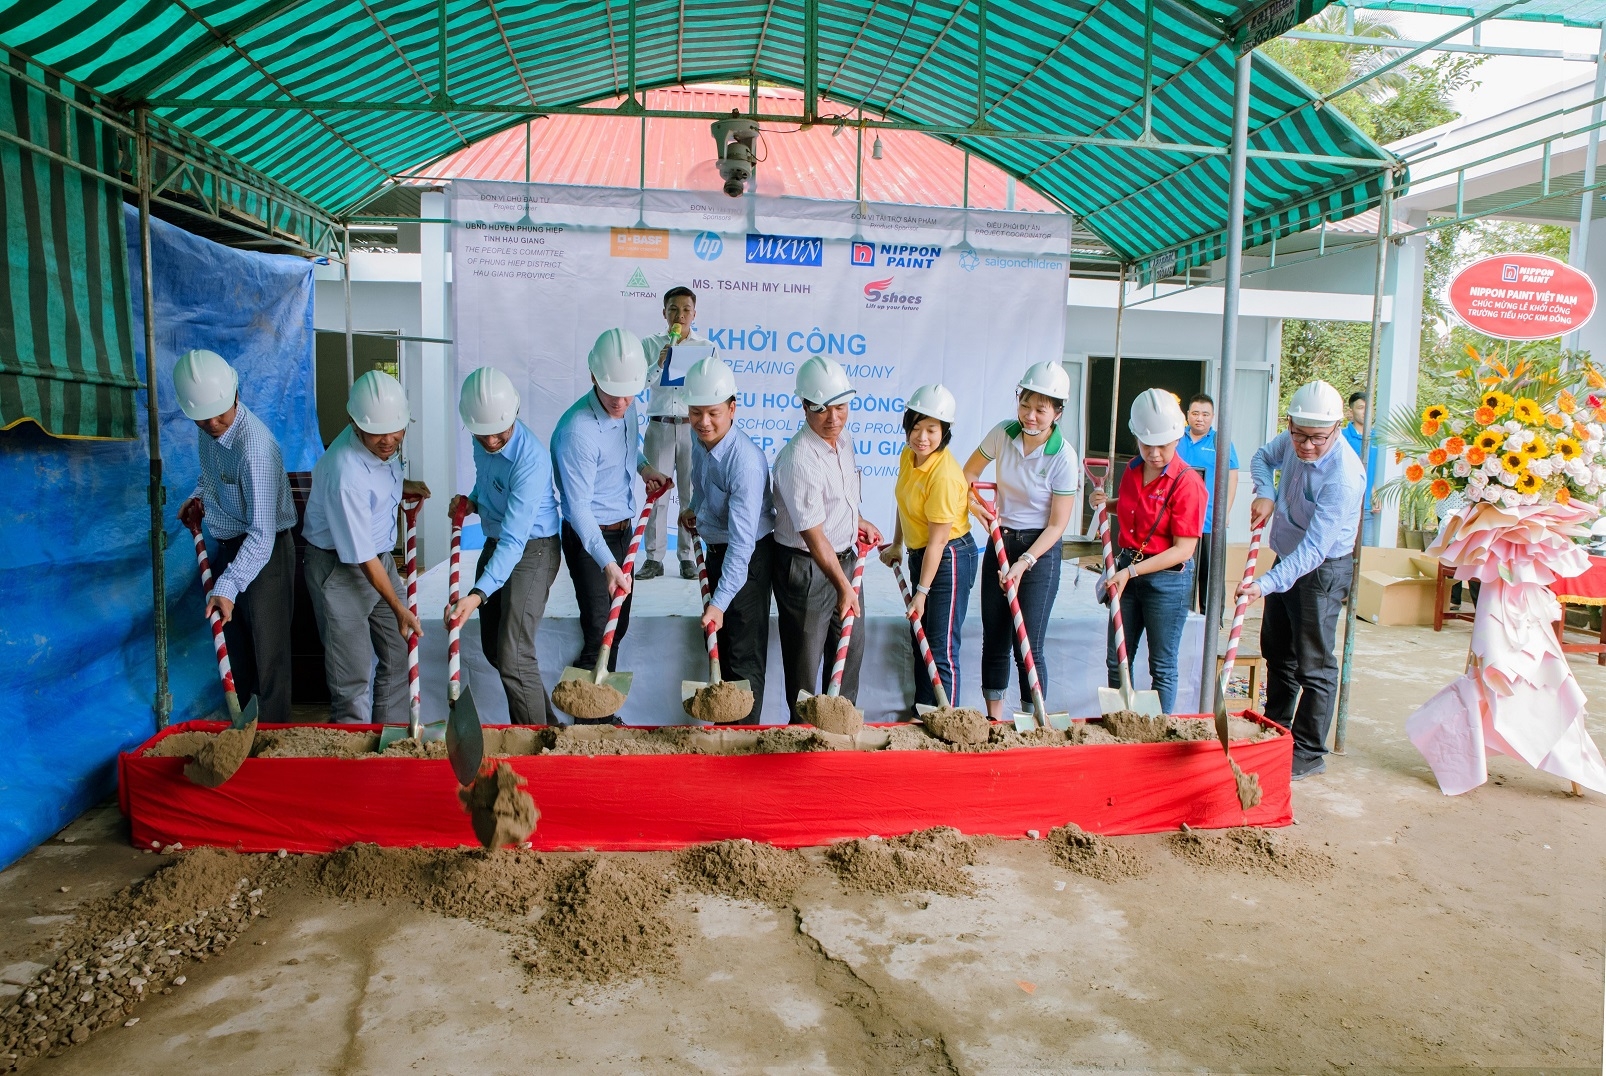 BASF partners up with customers to rebuild school in remote area in Hau Giang